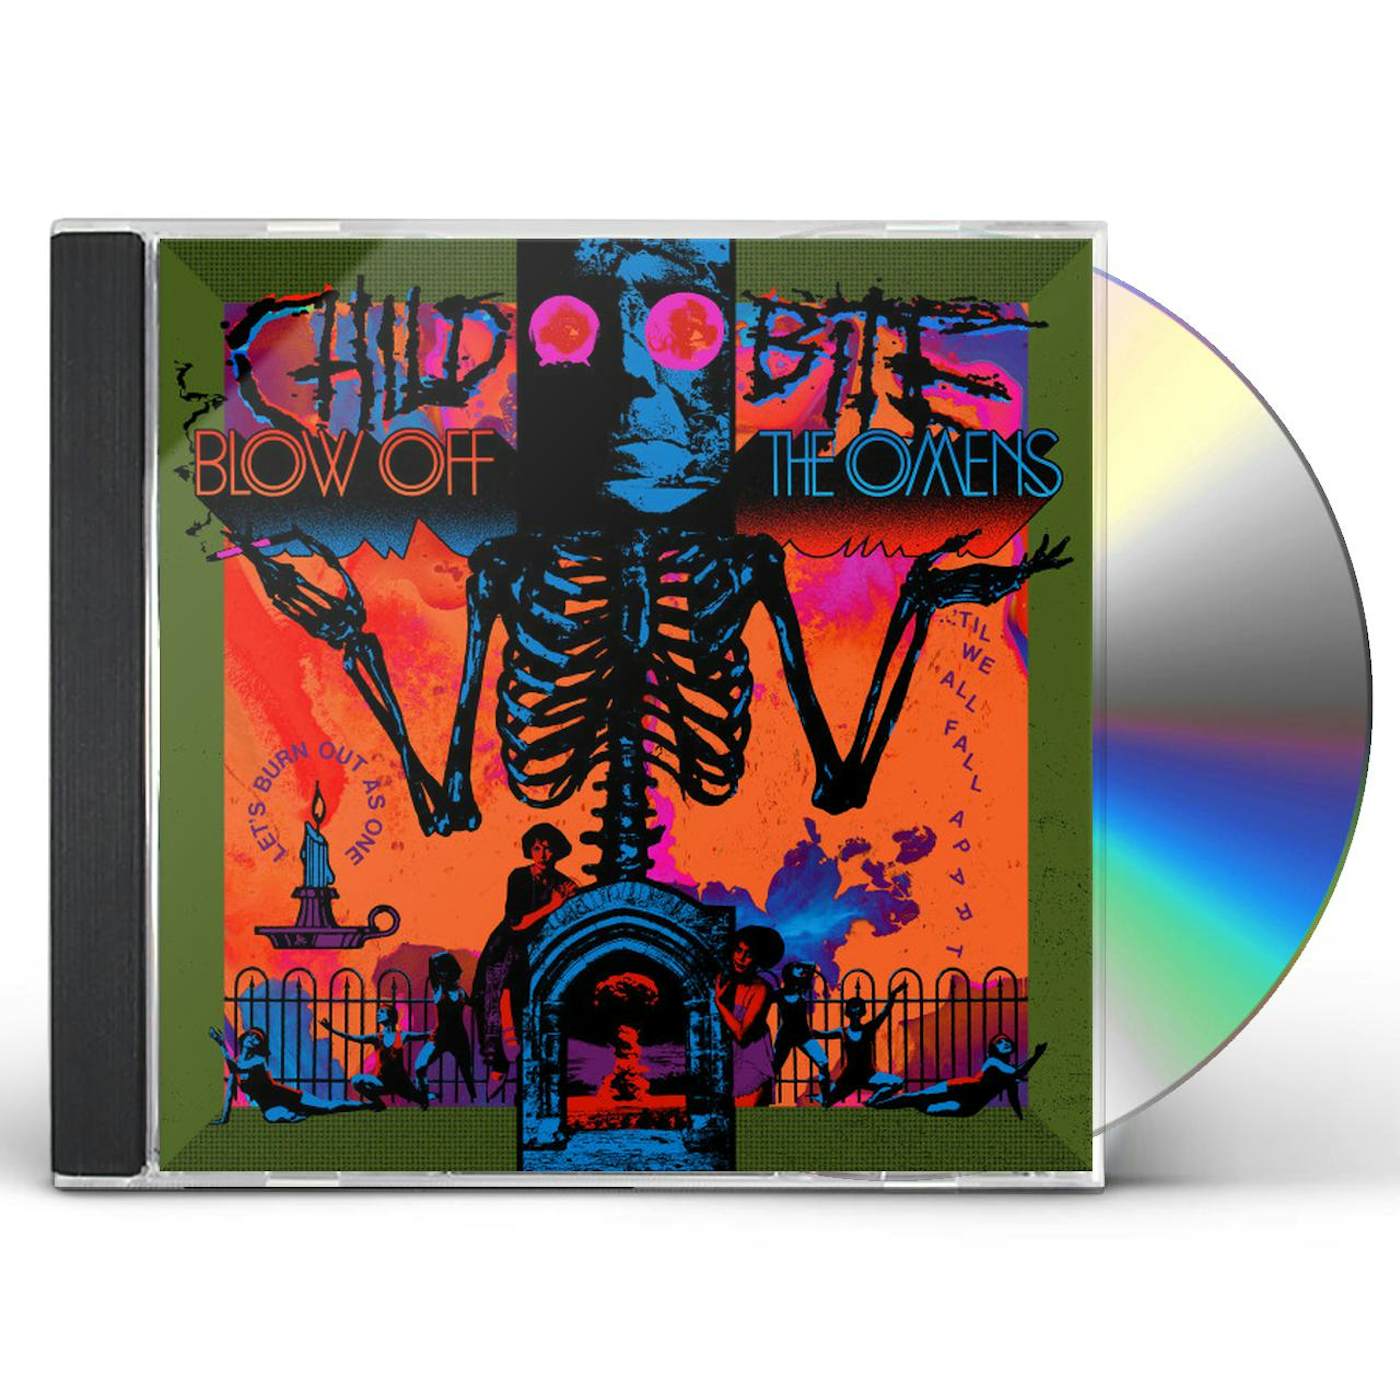 Child Bite BLOW OFF THE OMENS CD